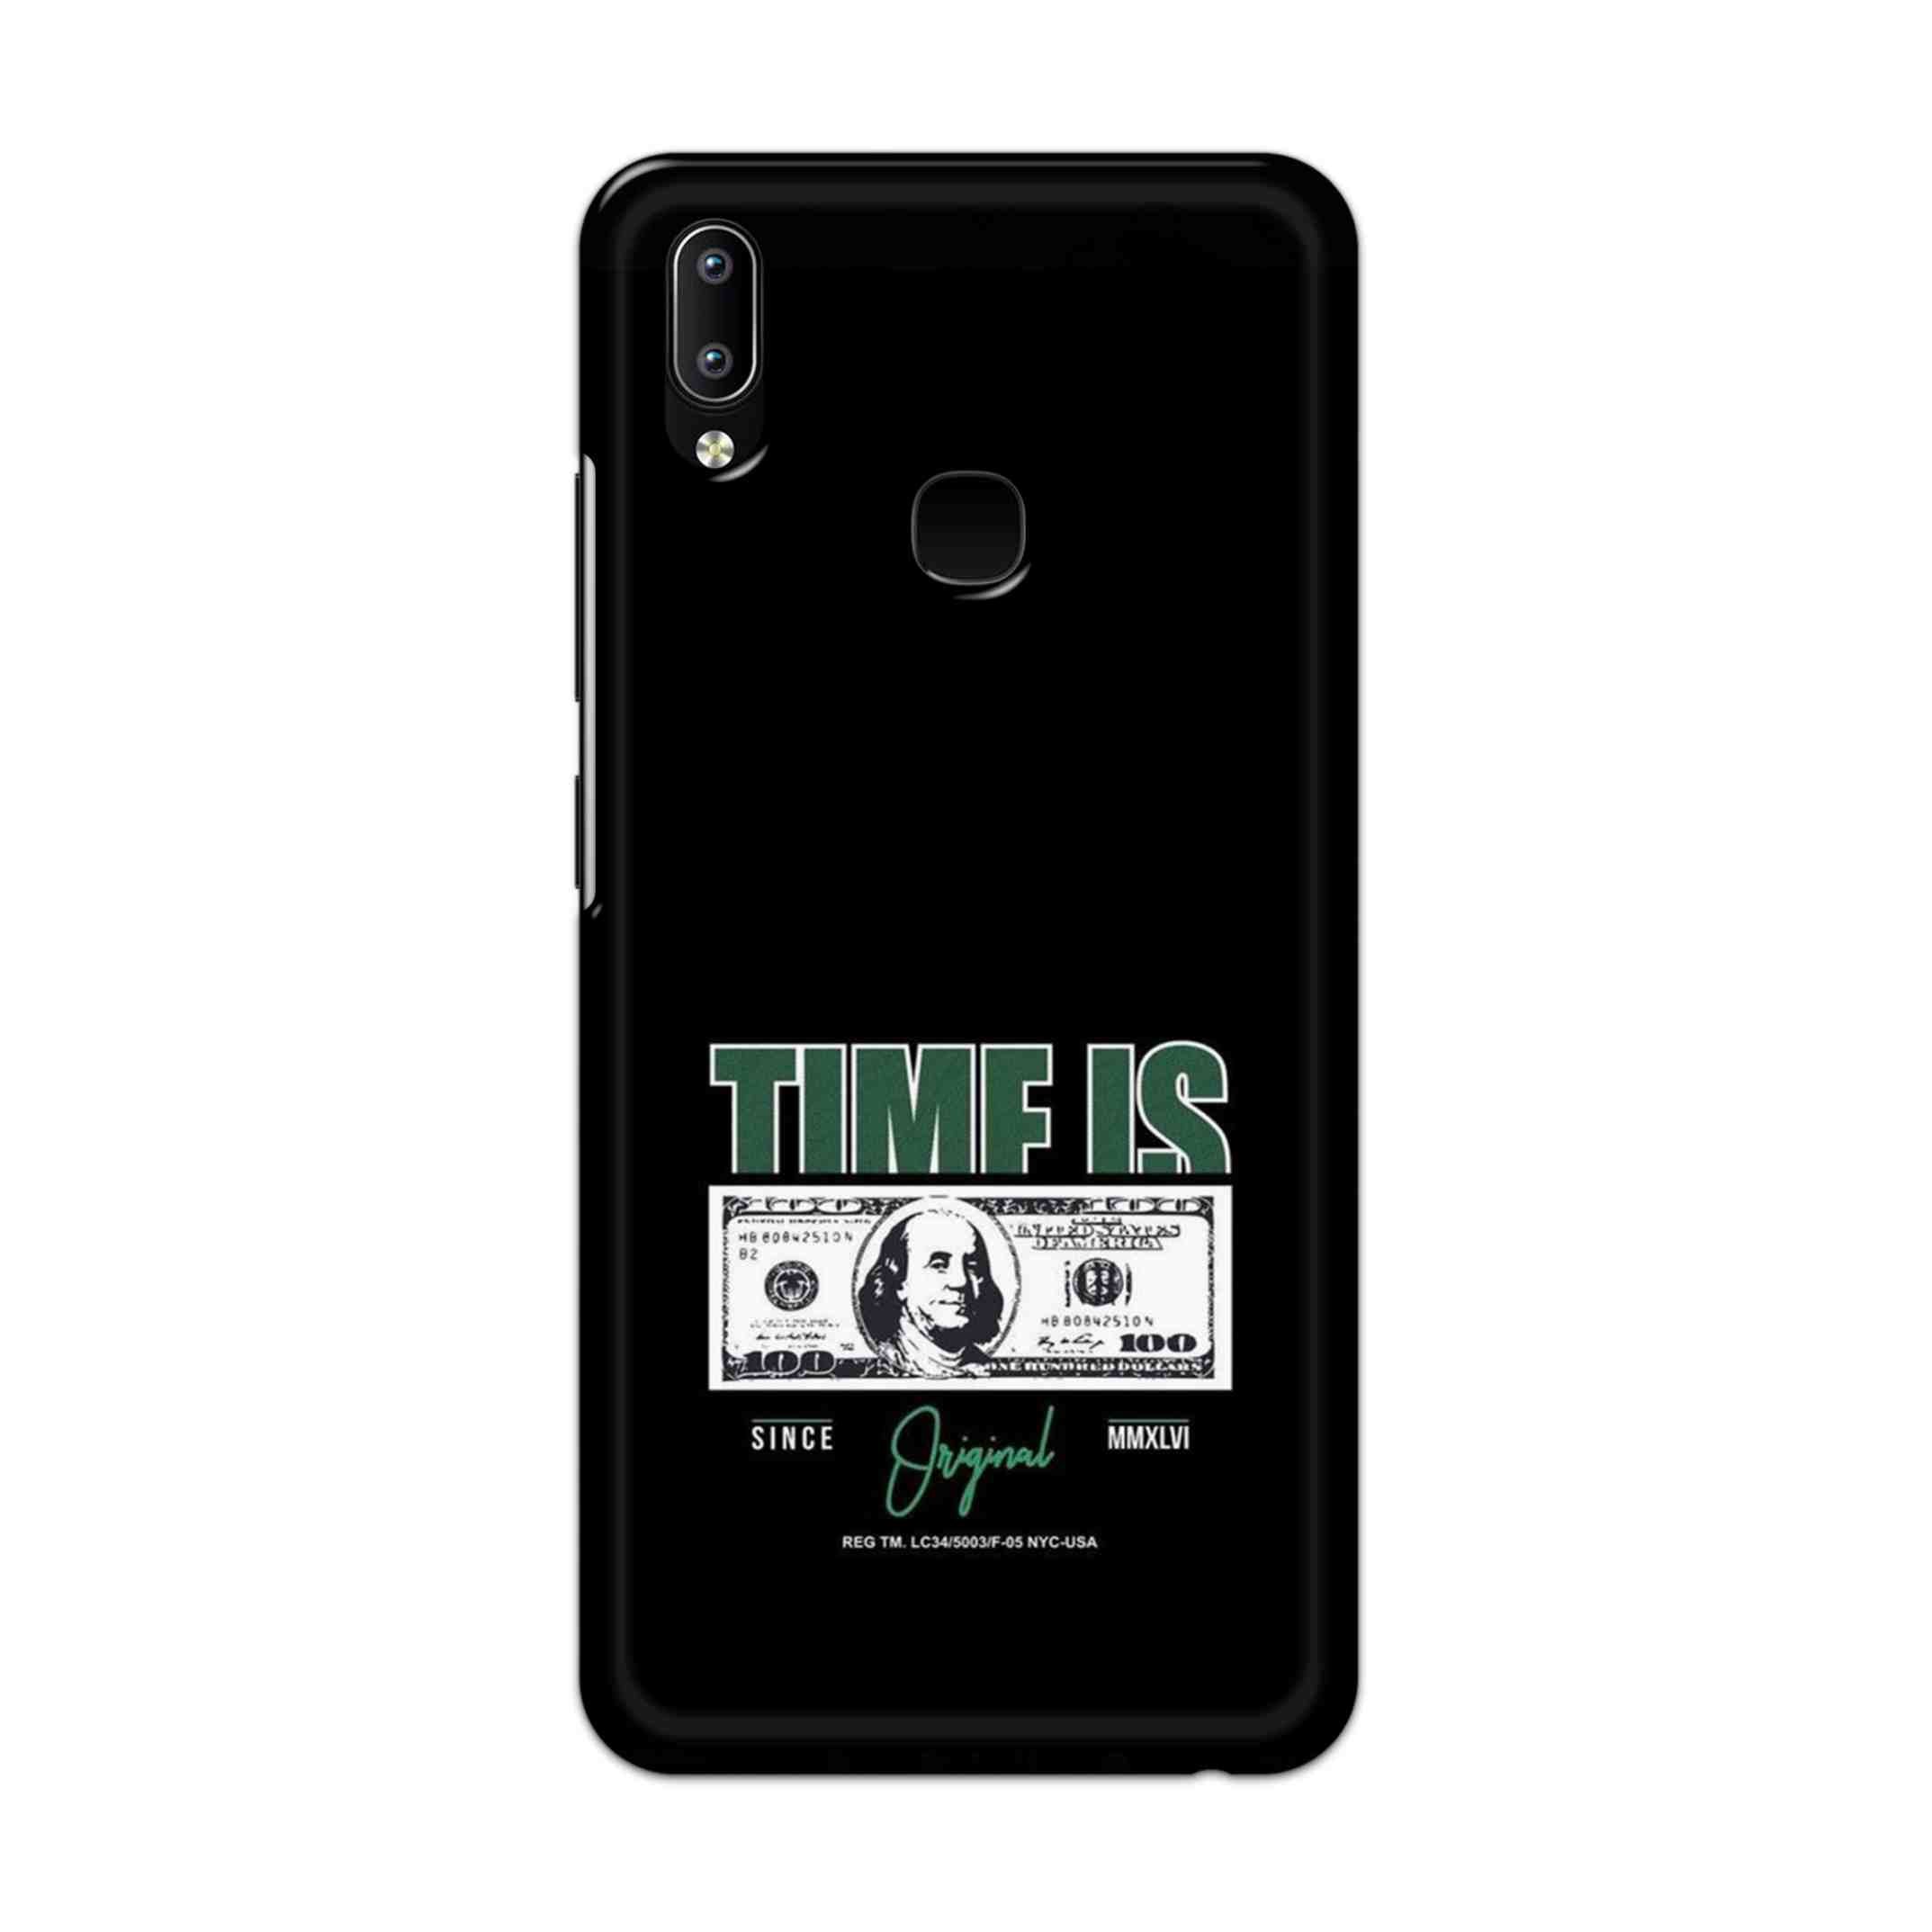 Buy Time Is Money Hard Back Mobile Phone Case Cover For Vivo Y95 / Y93 / Y91 Online